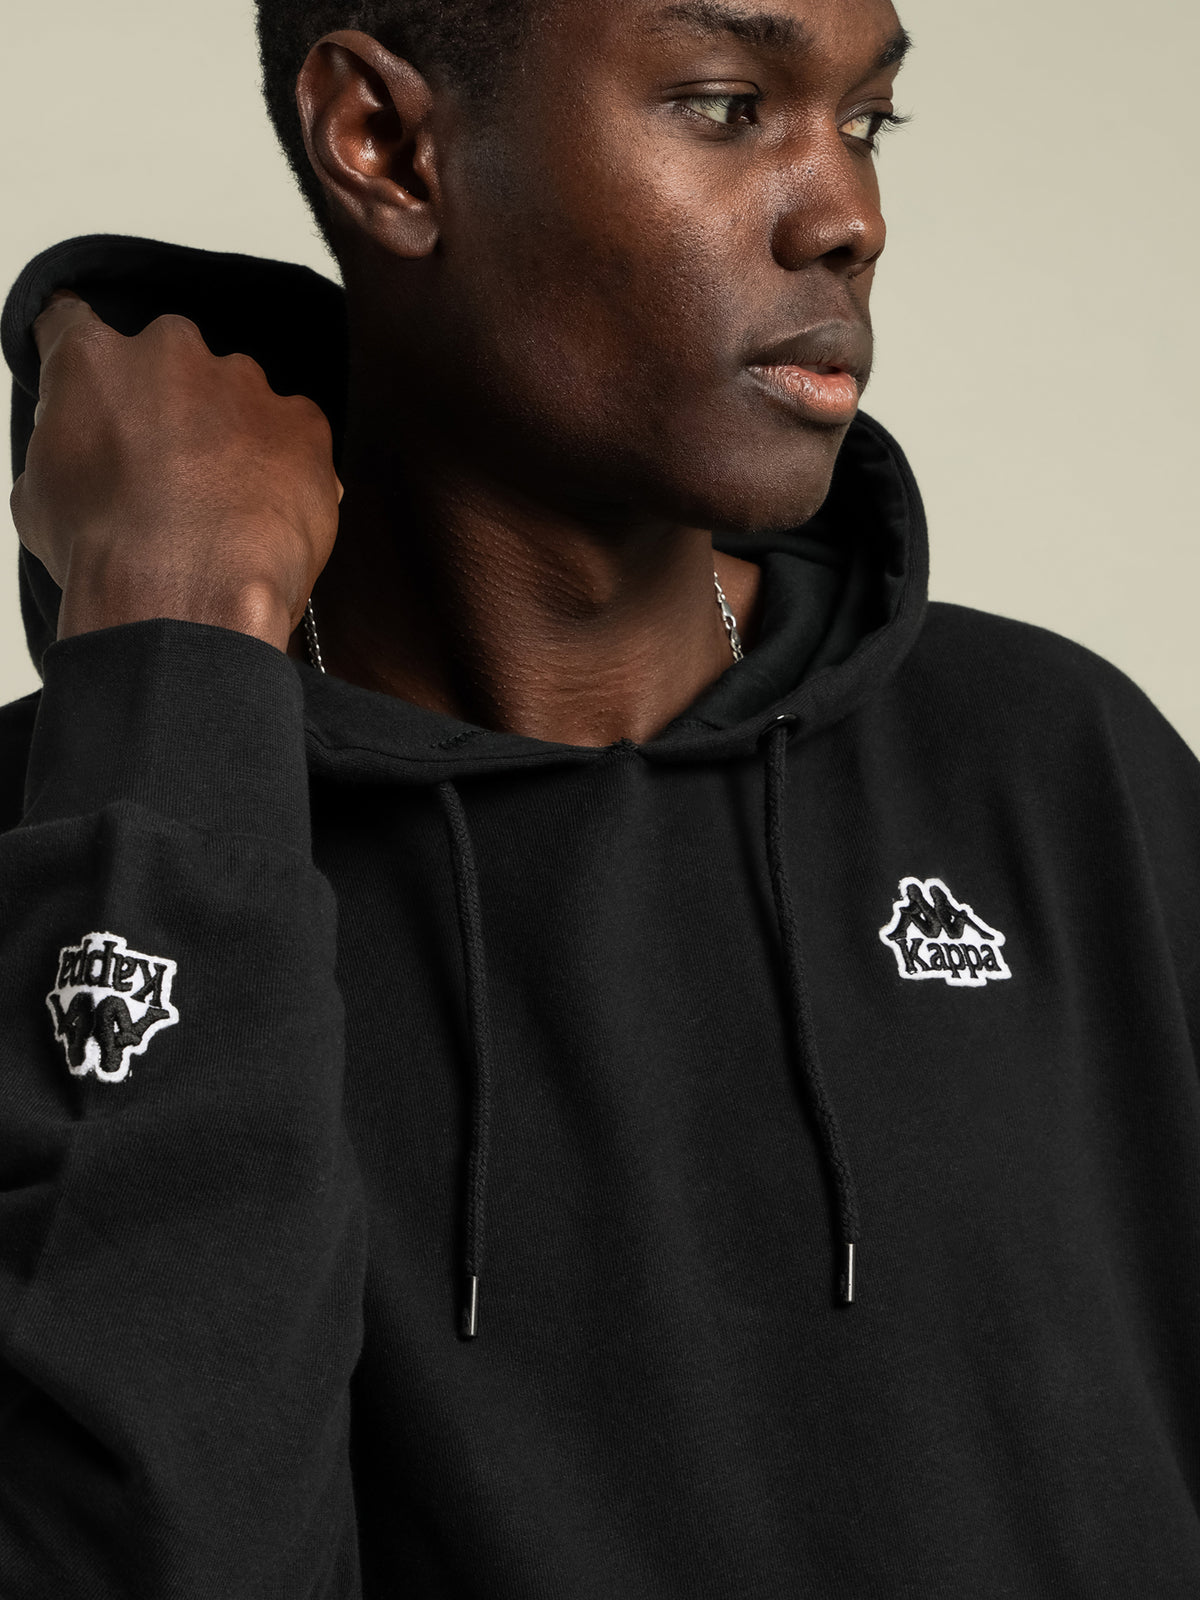 Authentic Tally Hoodie in Black